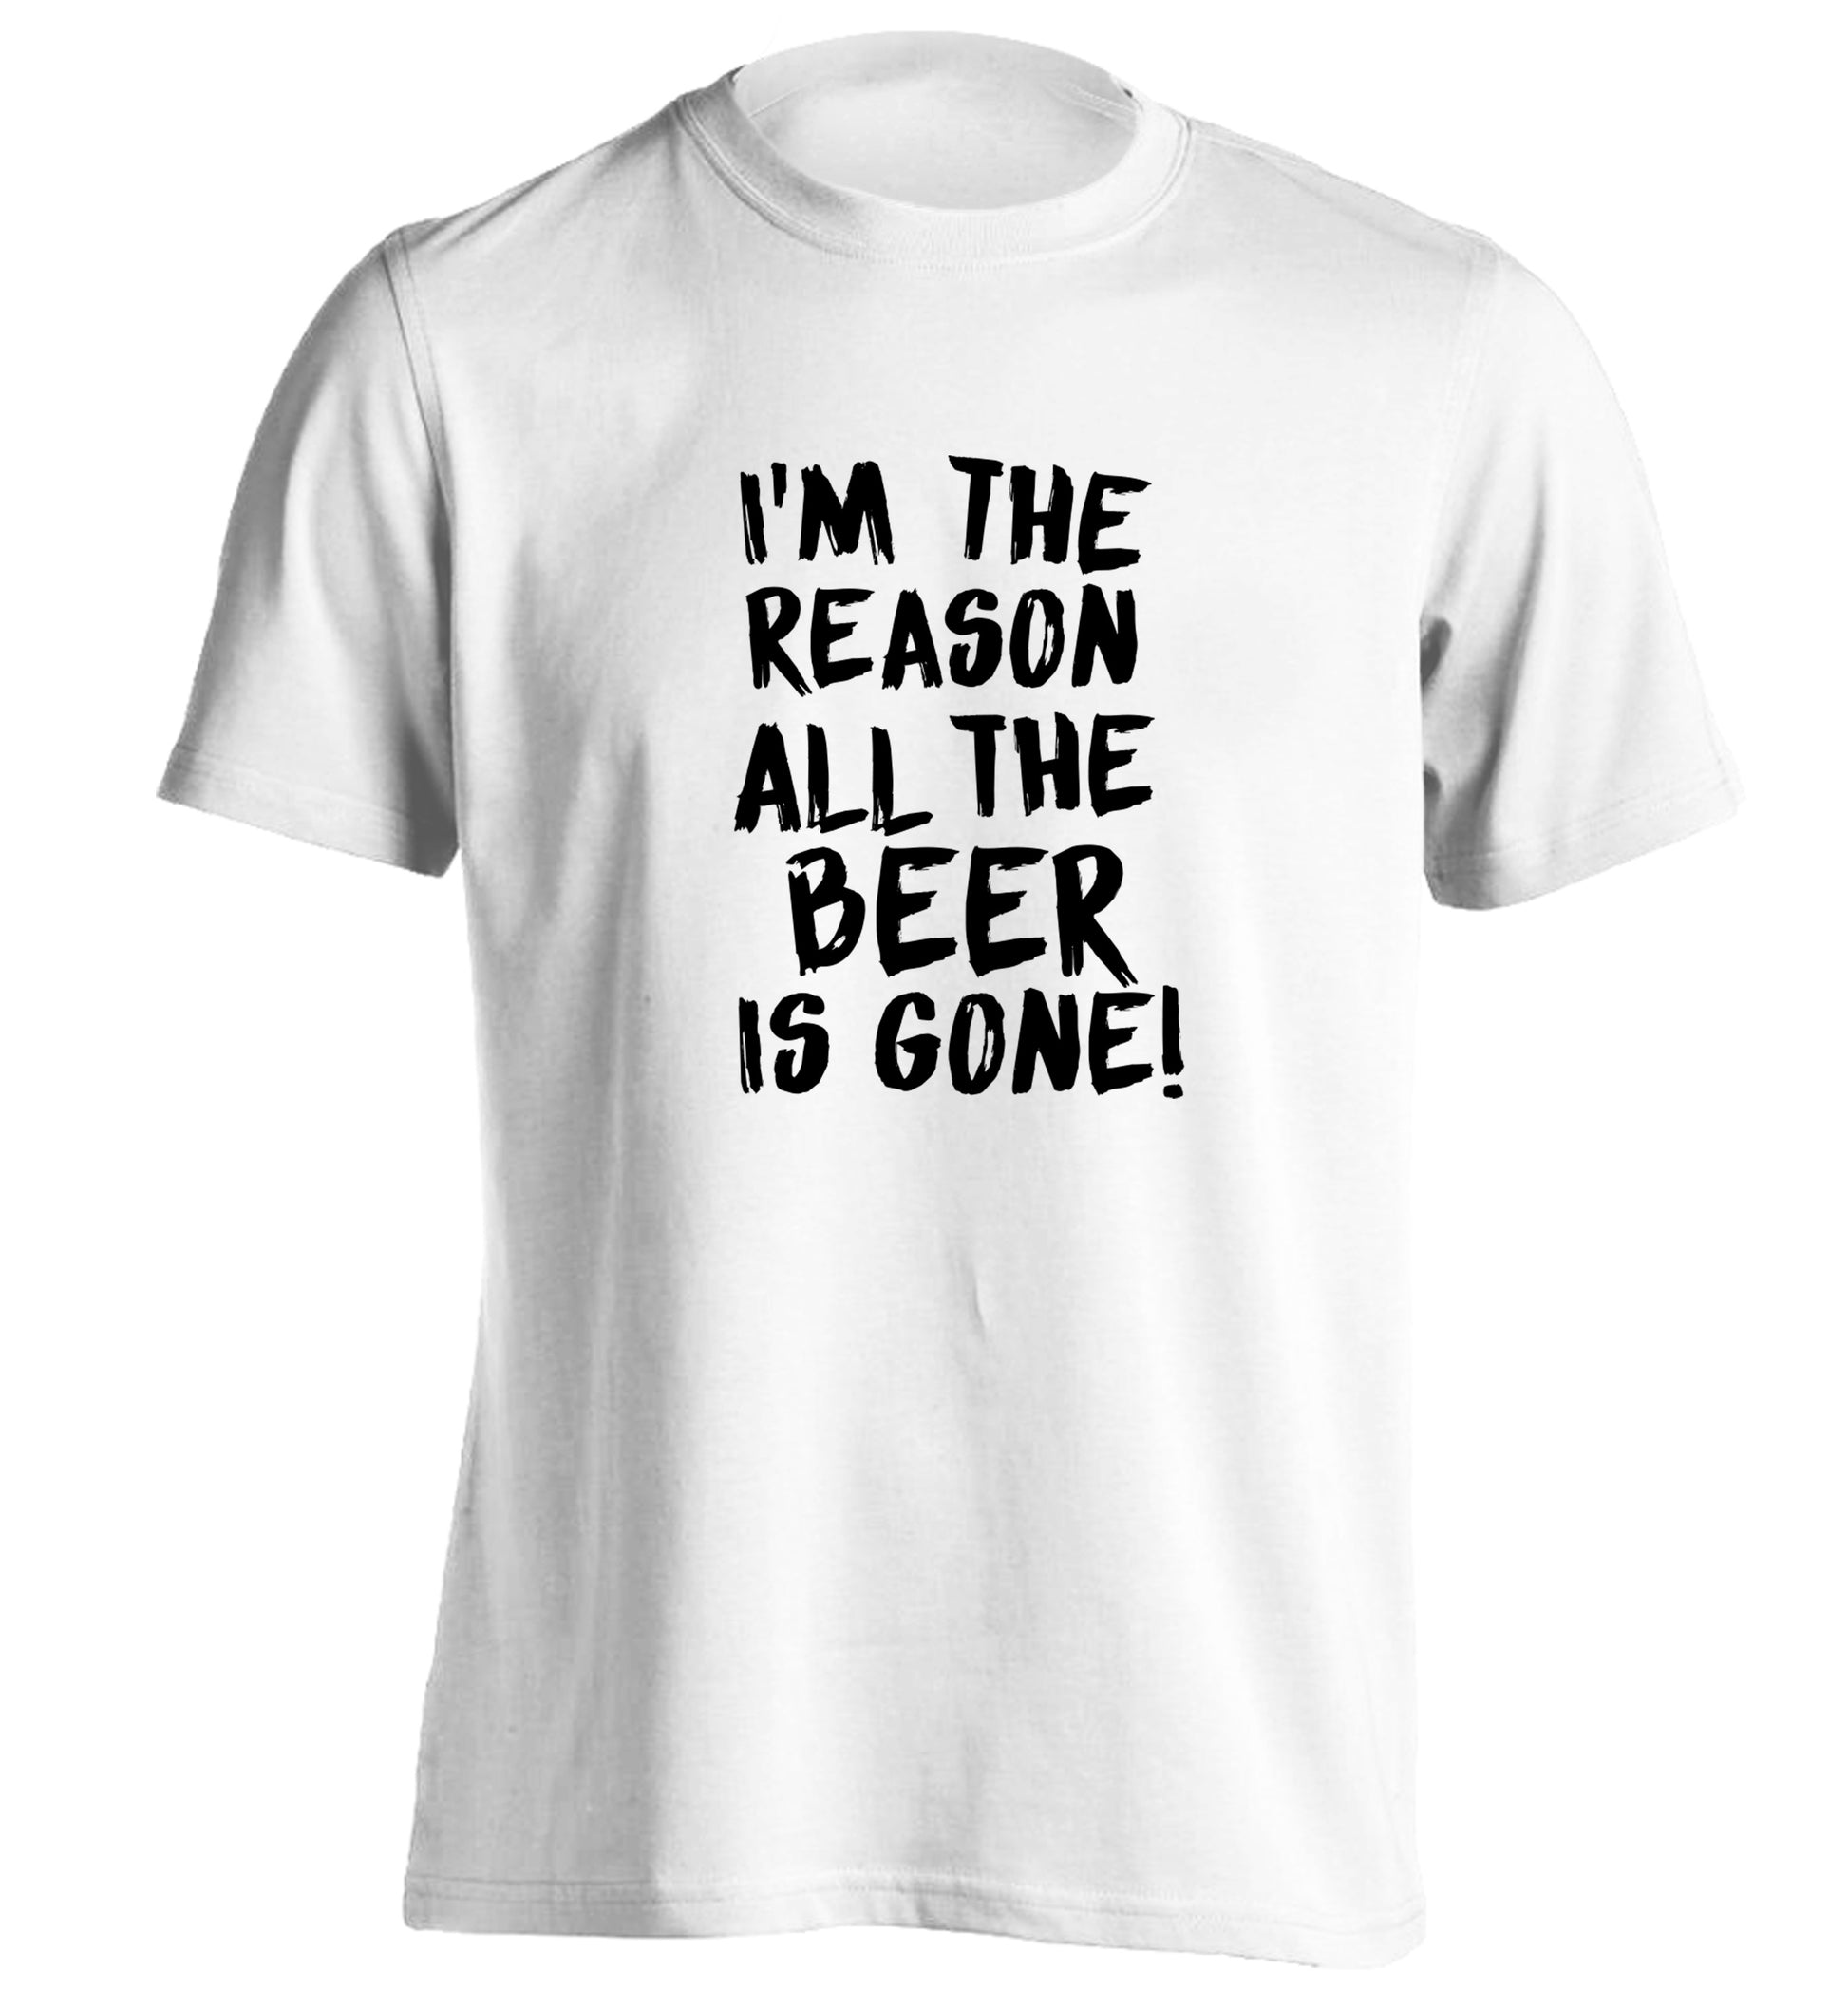 I'm the reason all the beer is gone adults unisex white Tshirt 2XL